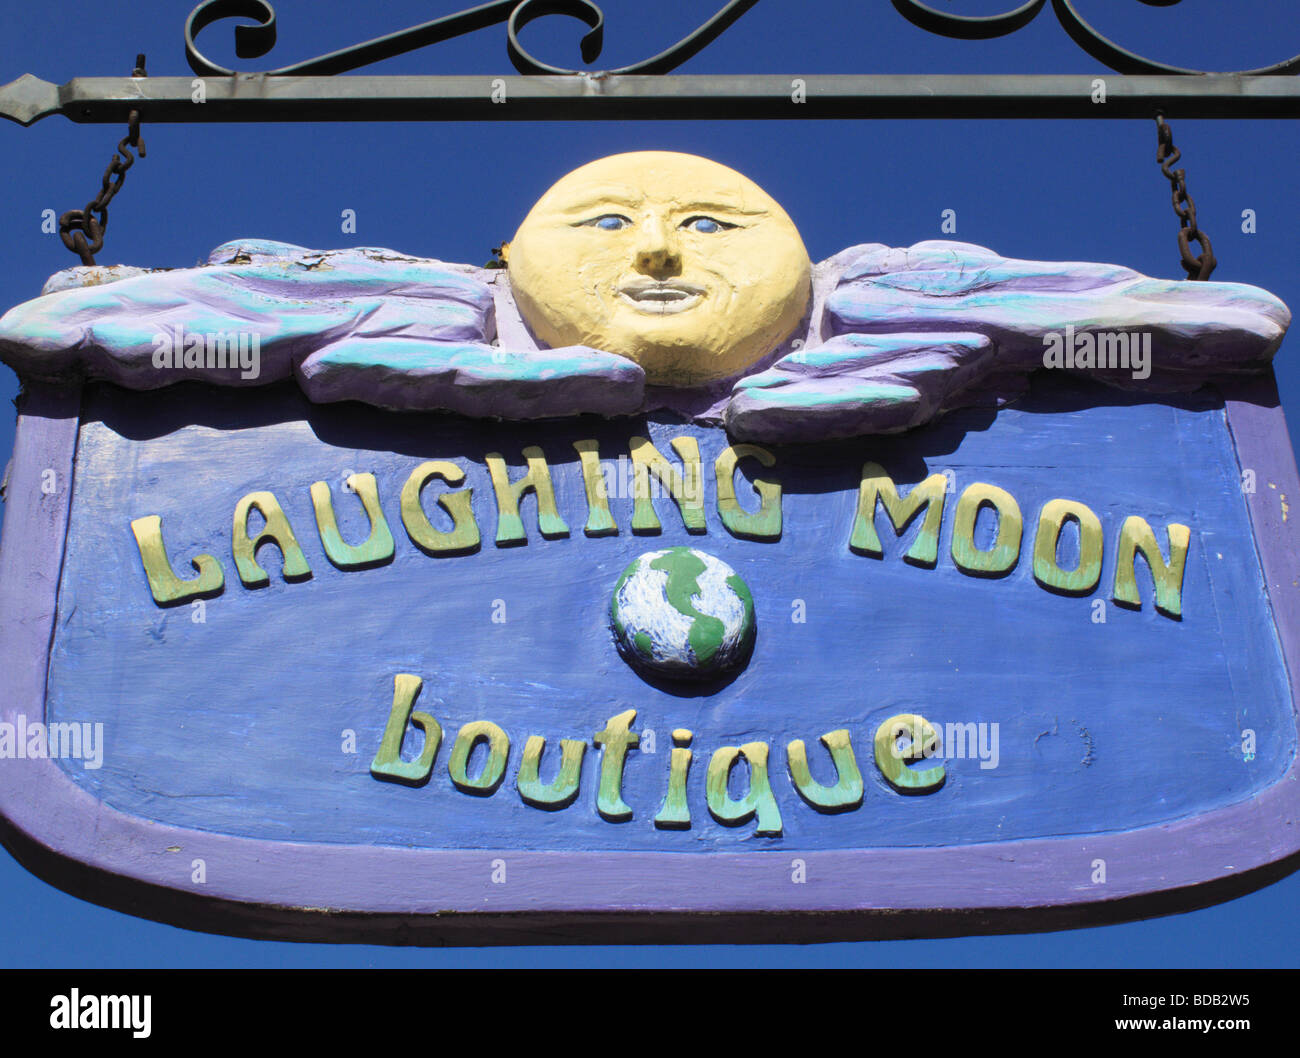 The Laughing Moon Boutique, Plymouth MA Stock Photo